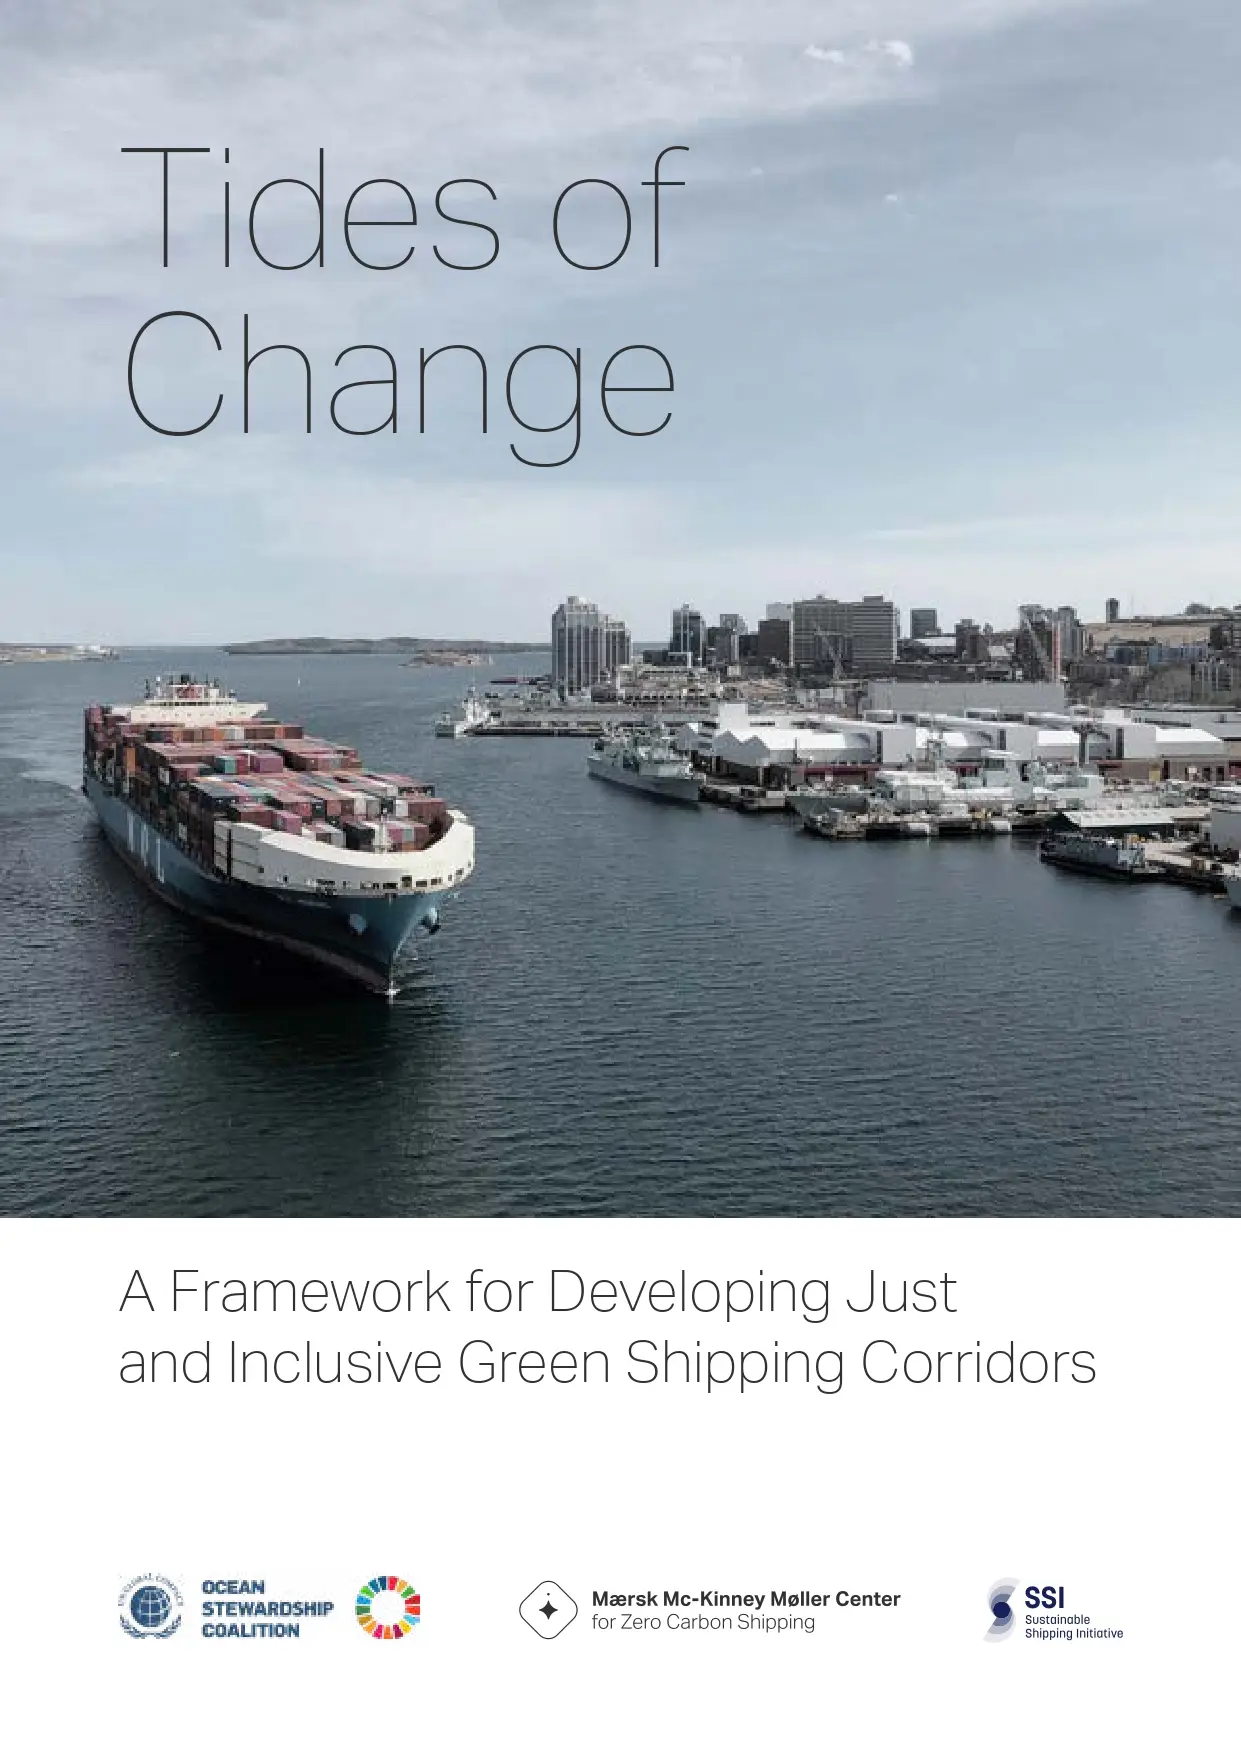 Tides of Change (A Framework for Developing Just and Inclusive Green Shipping Corridors)